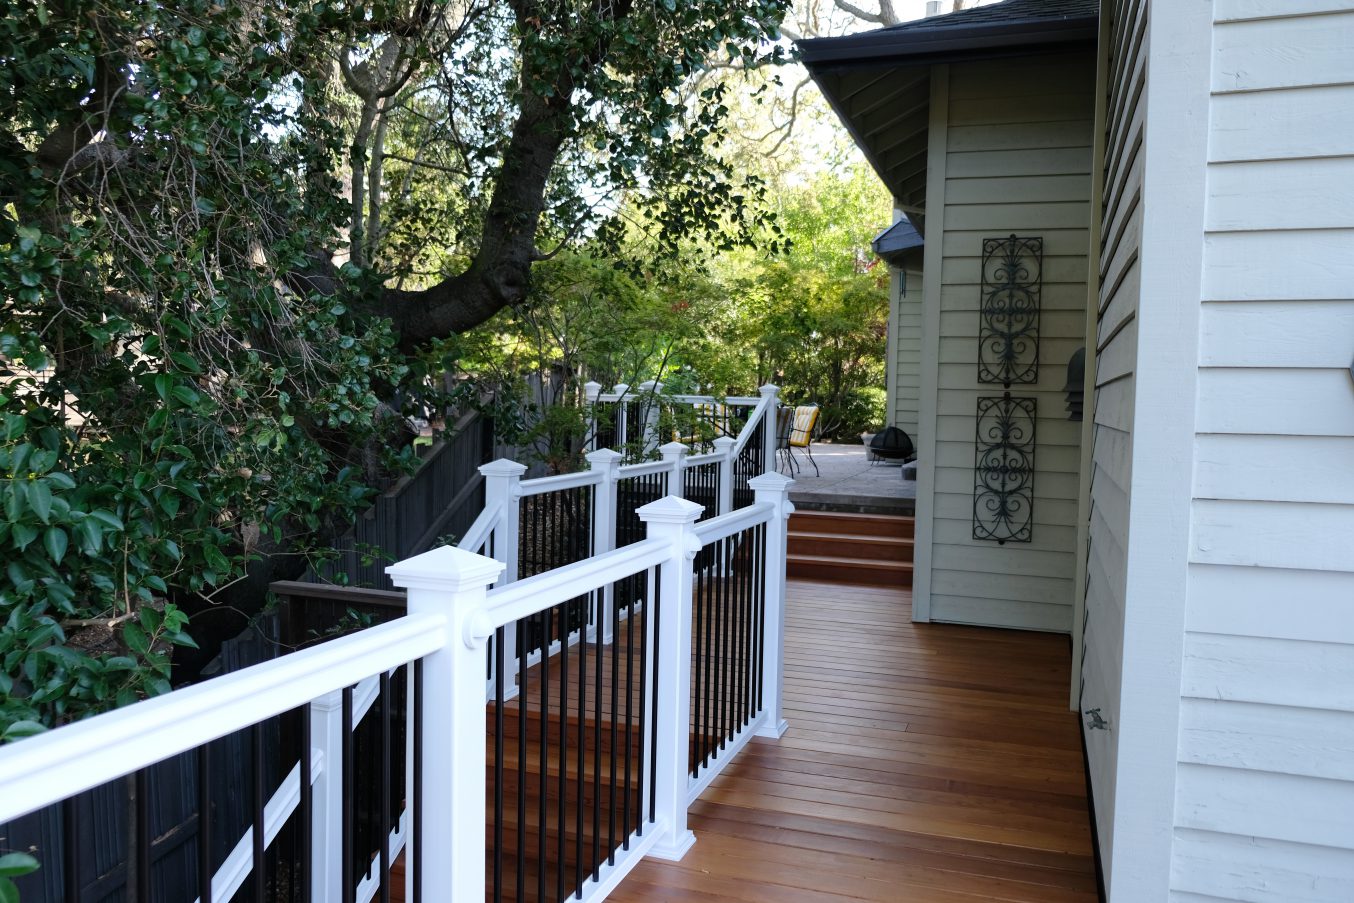 Consider Proper Lighting When Constructing Your Residential Deck